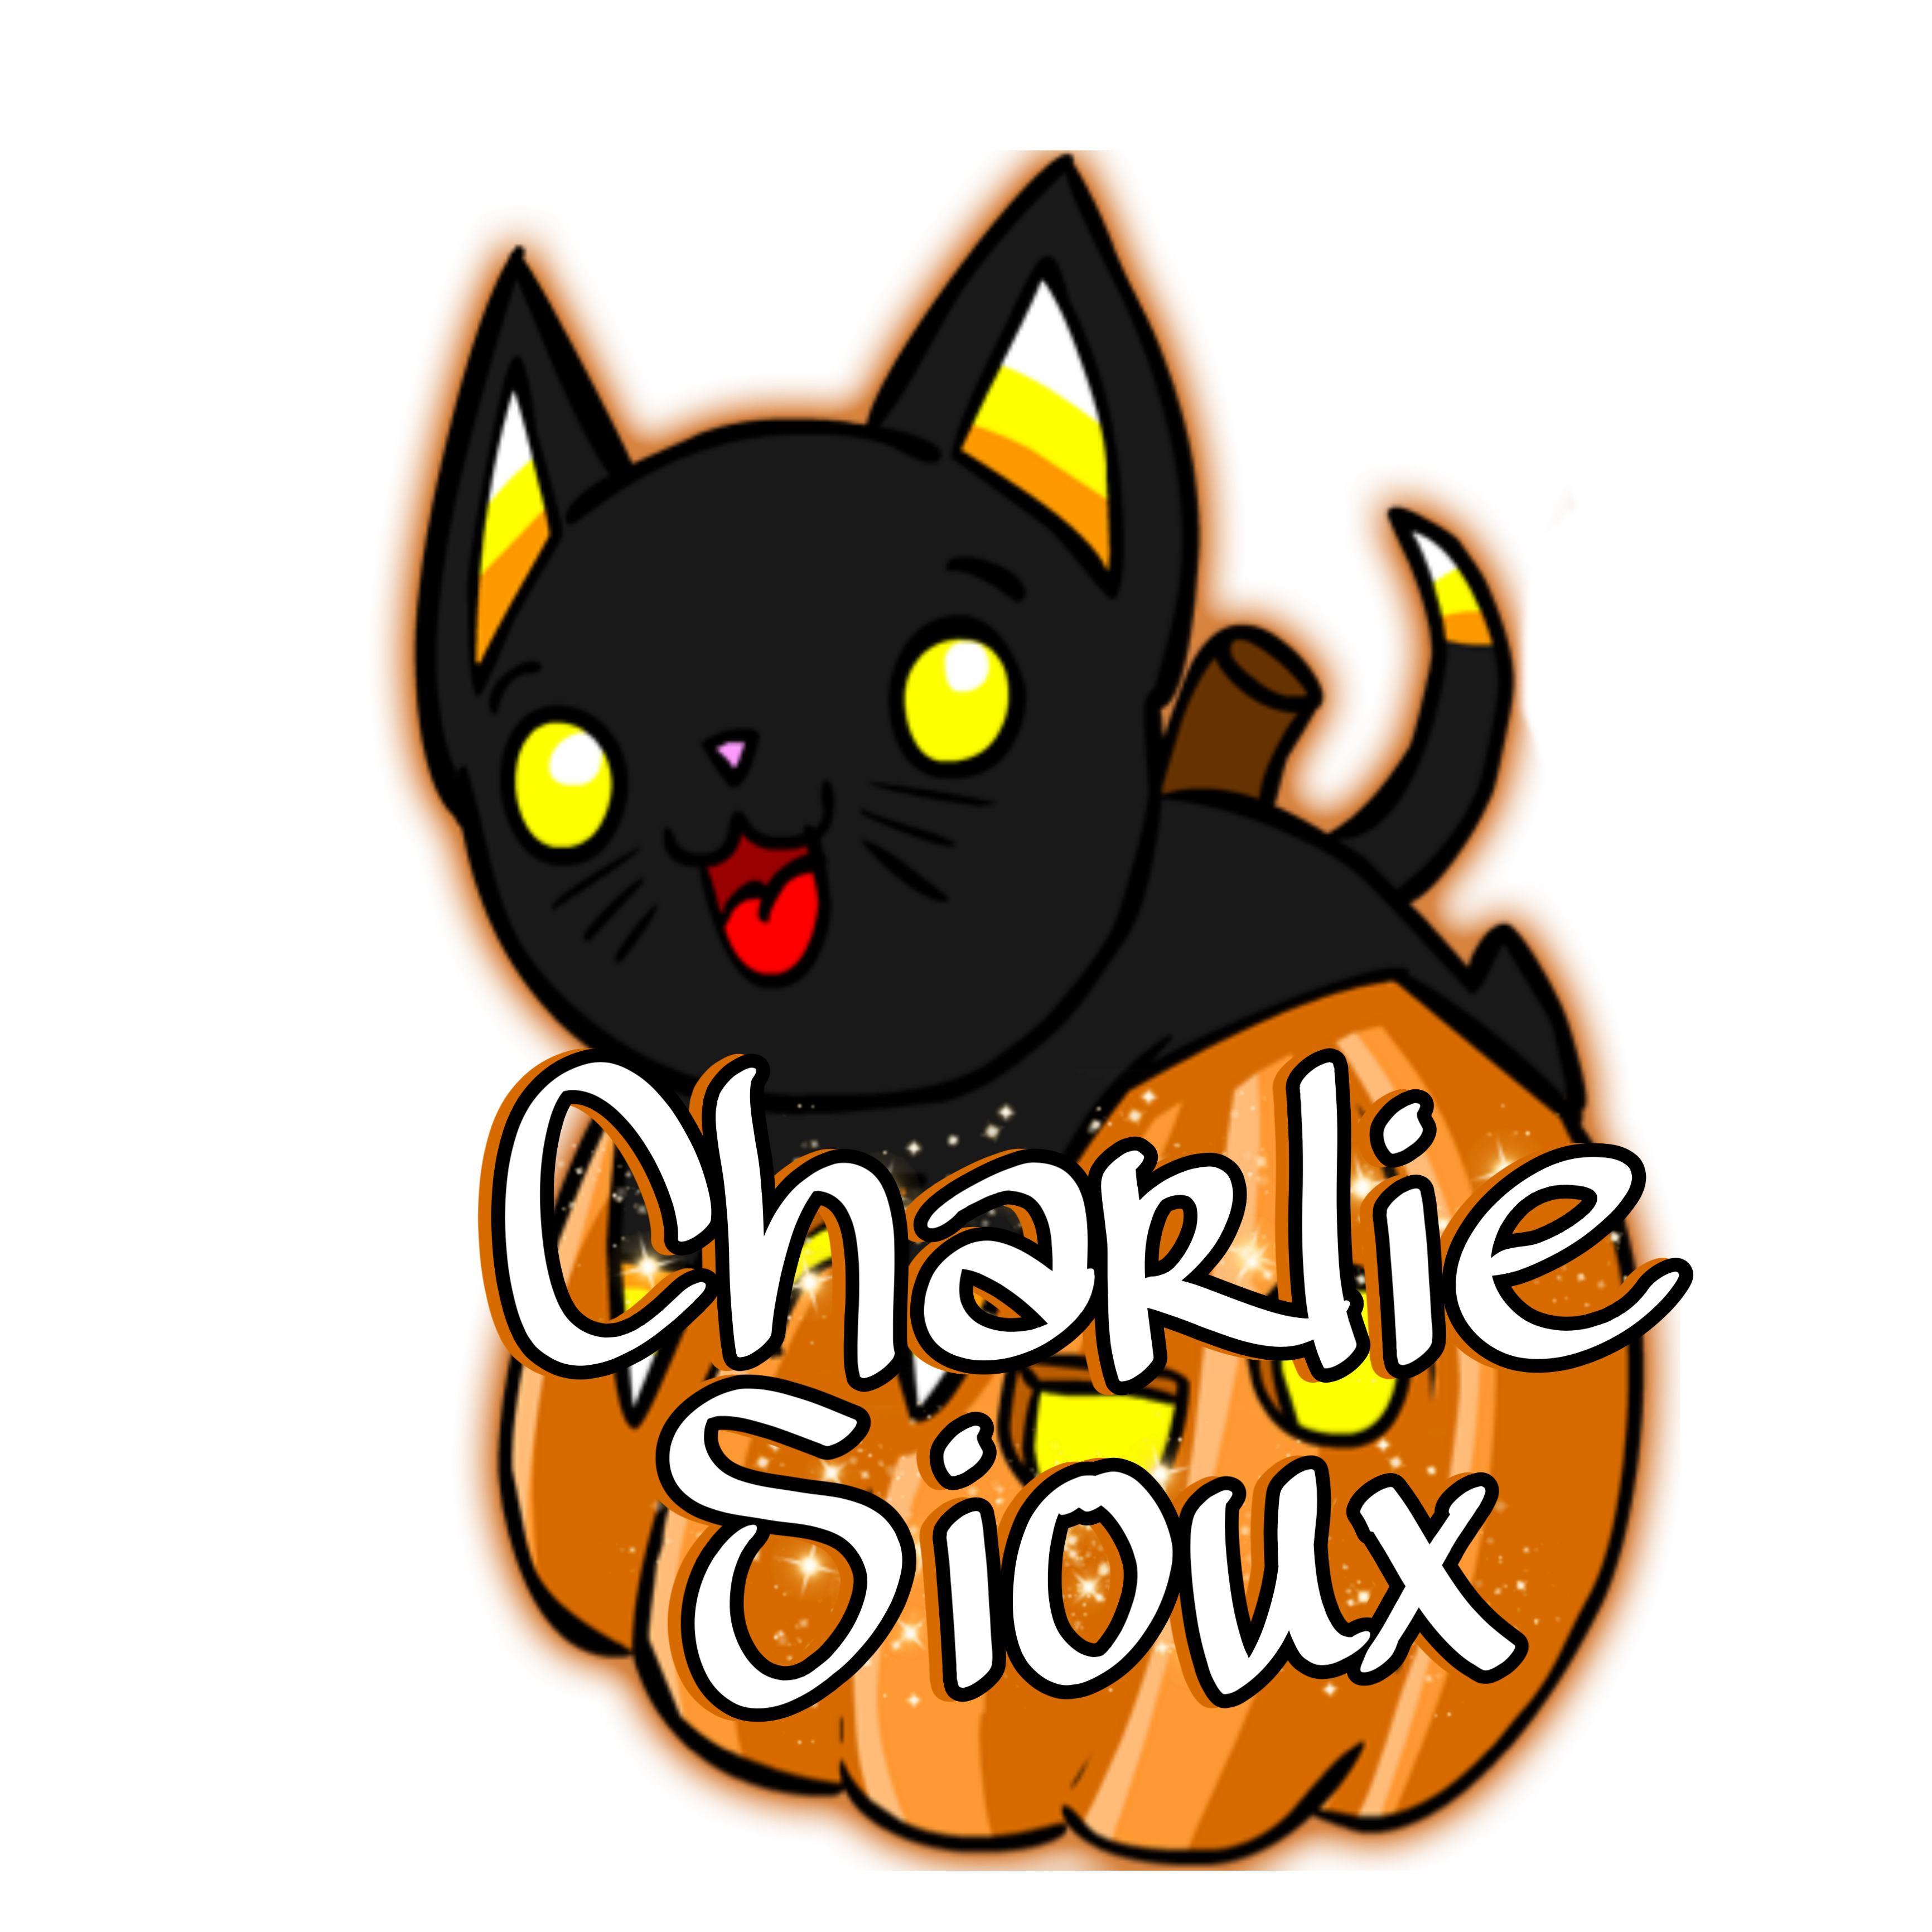 Charlie Sioux | 18+ only | profile avatar